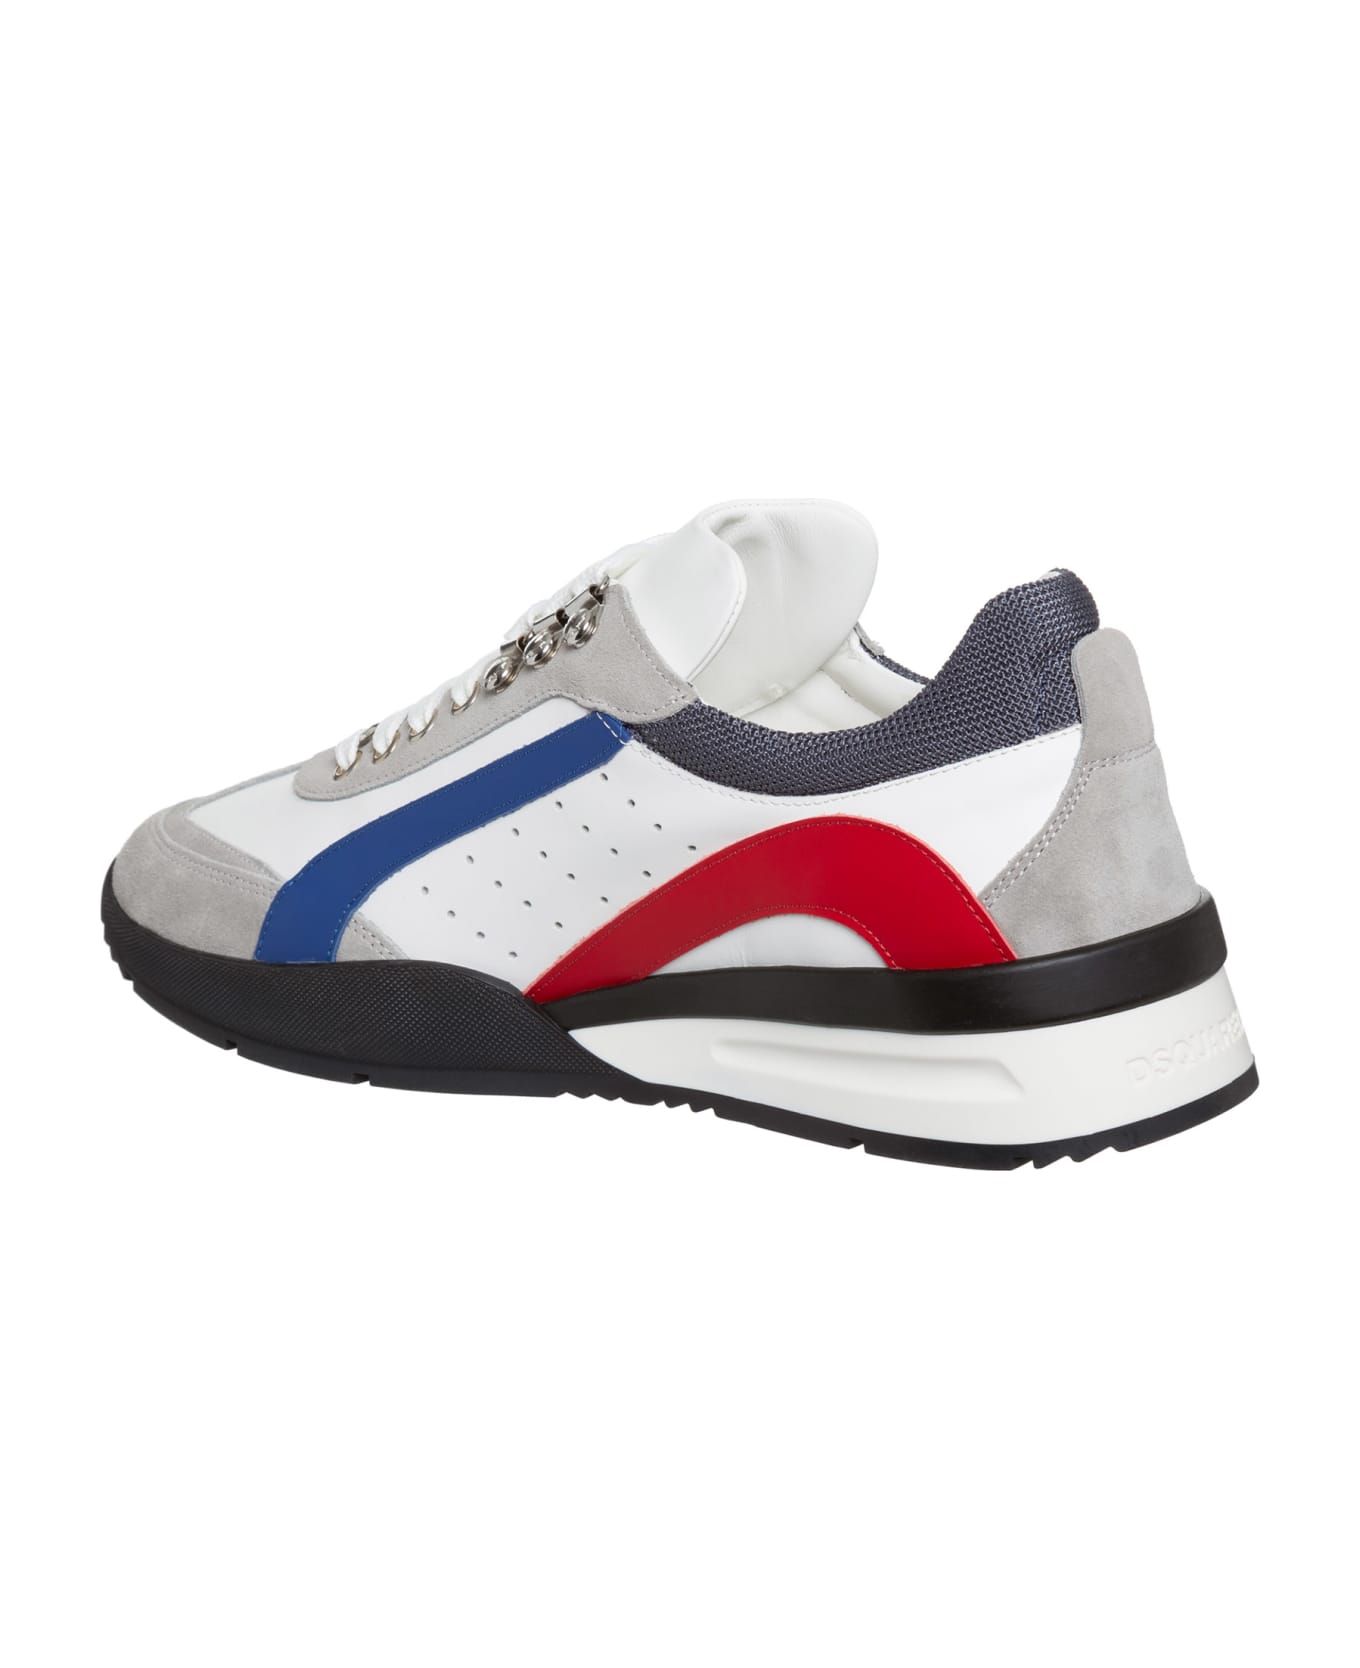 Dsquared2 Legend Leather Sneakers - White - Blue - Red